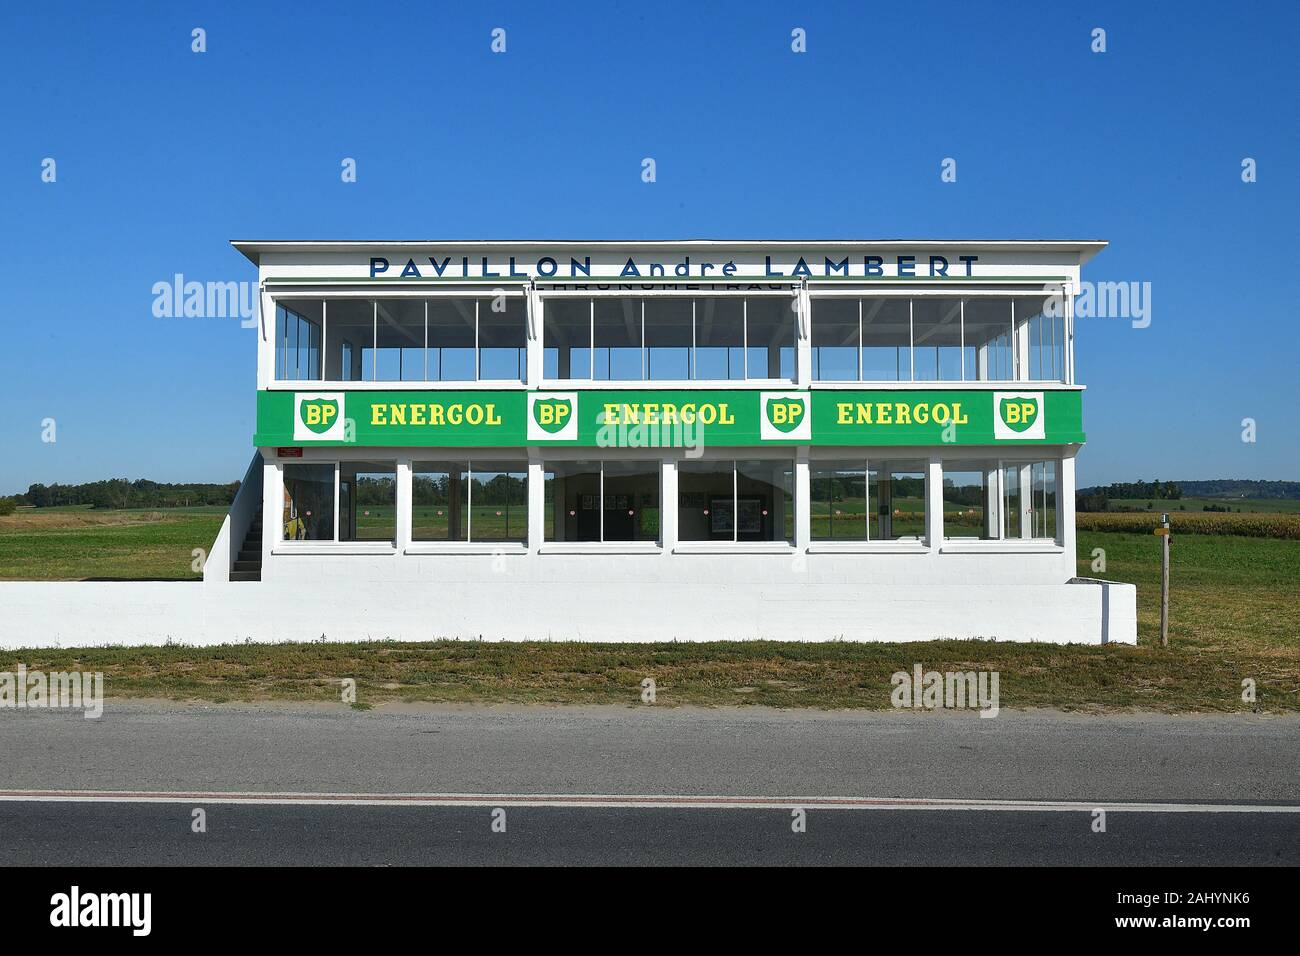 Pavillon Lambert, timekeepers' building of the Reims-Gueux Circuit (north-eastern France). The site has been restored with the help of the Fondation Stock Photo